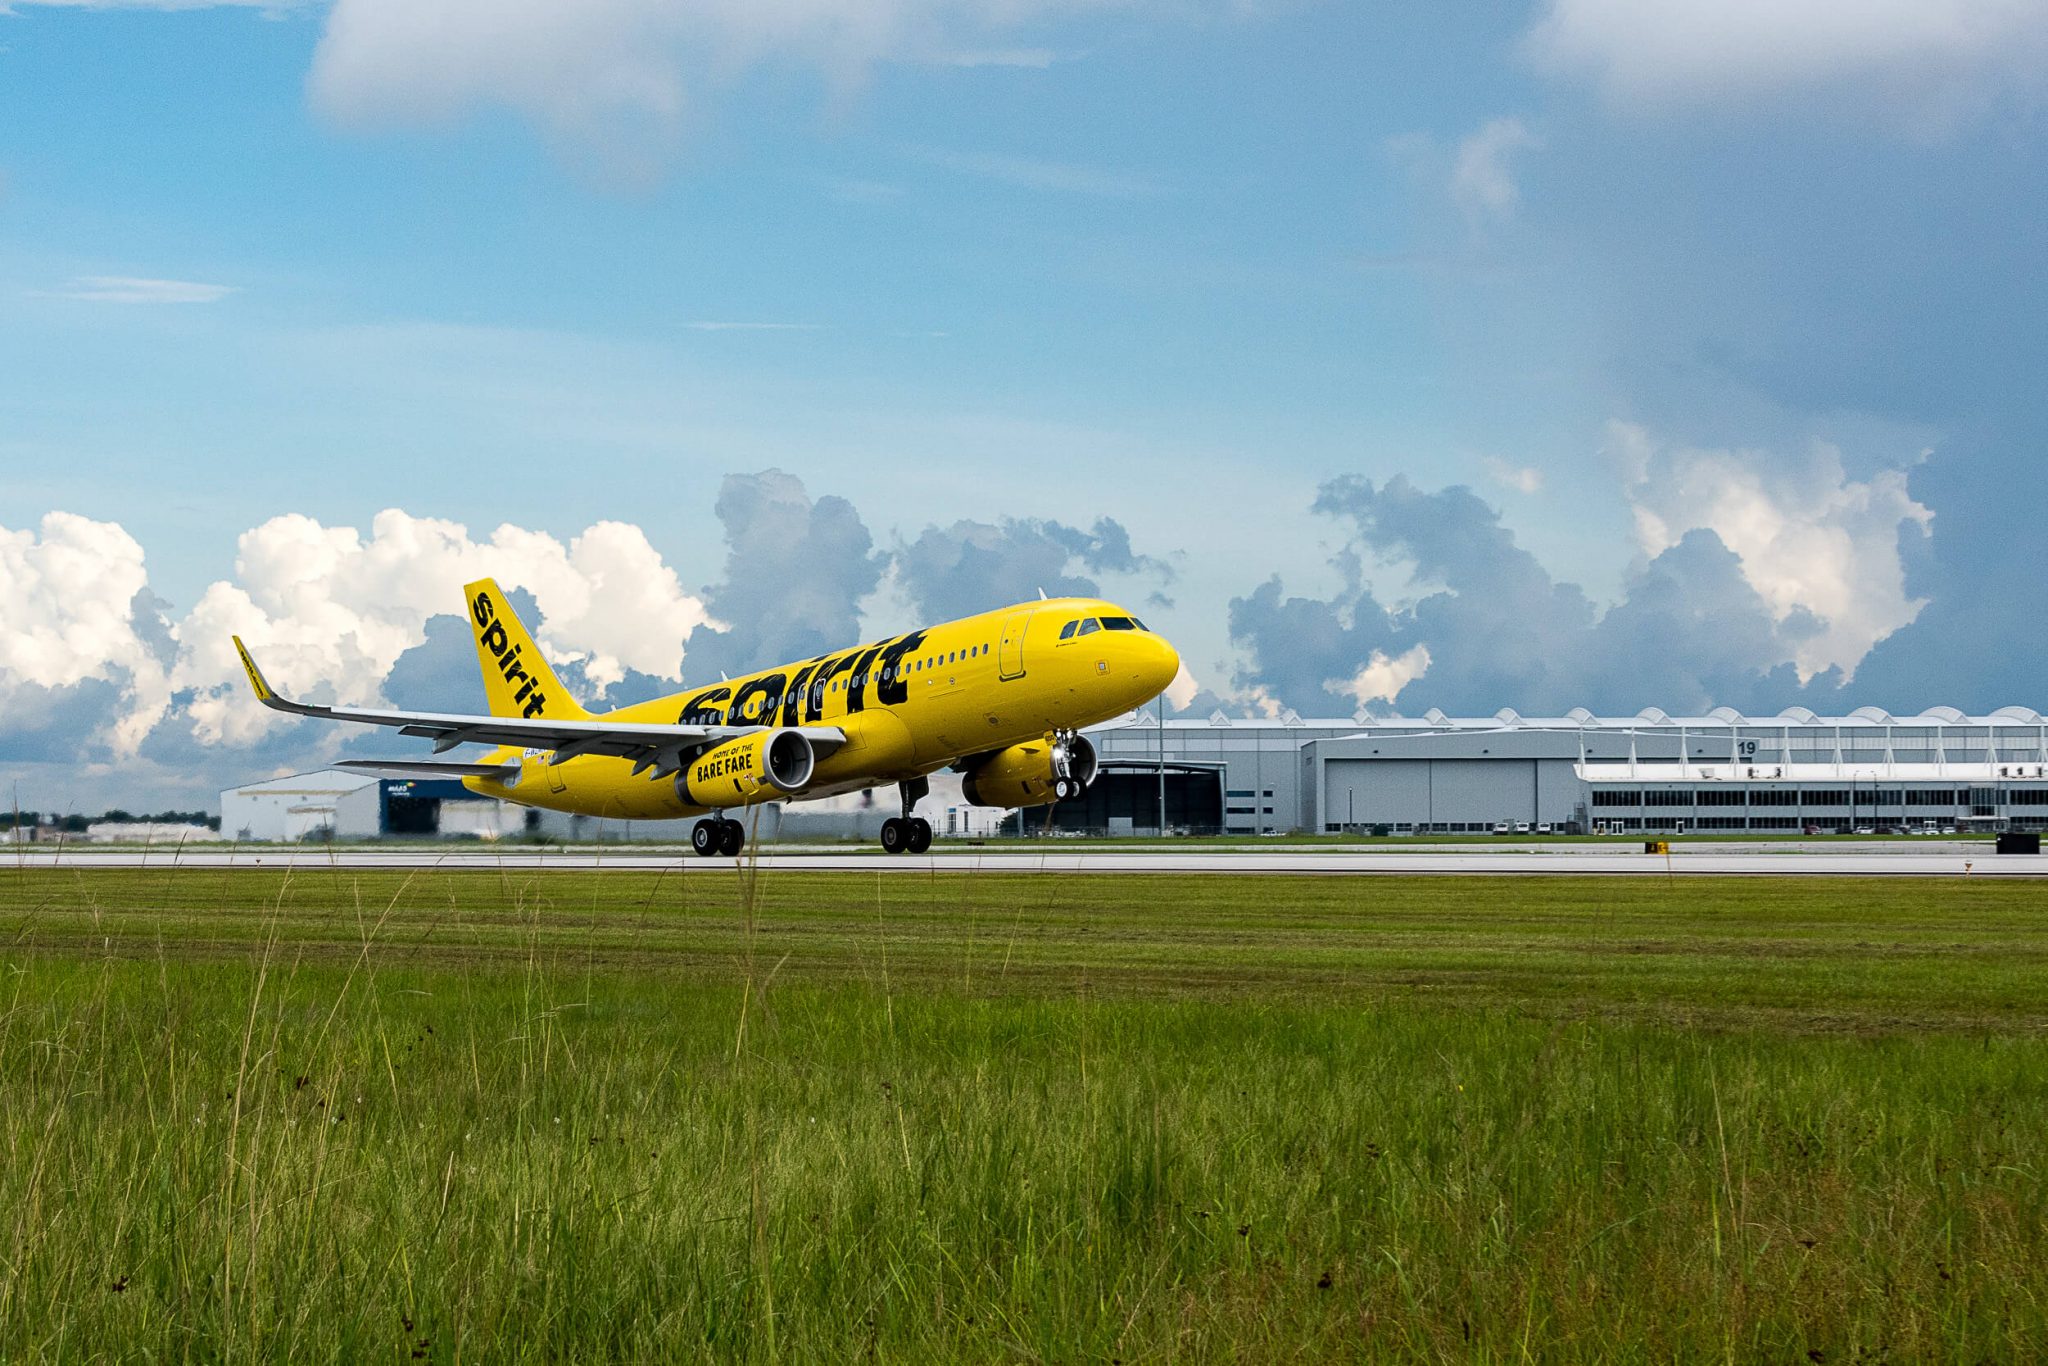 Spirit Airlines signs a service agreement for MINT TRMS